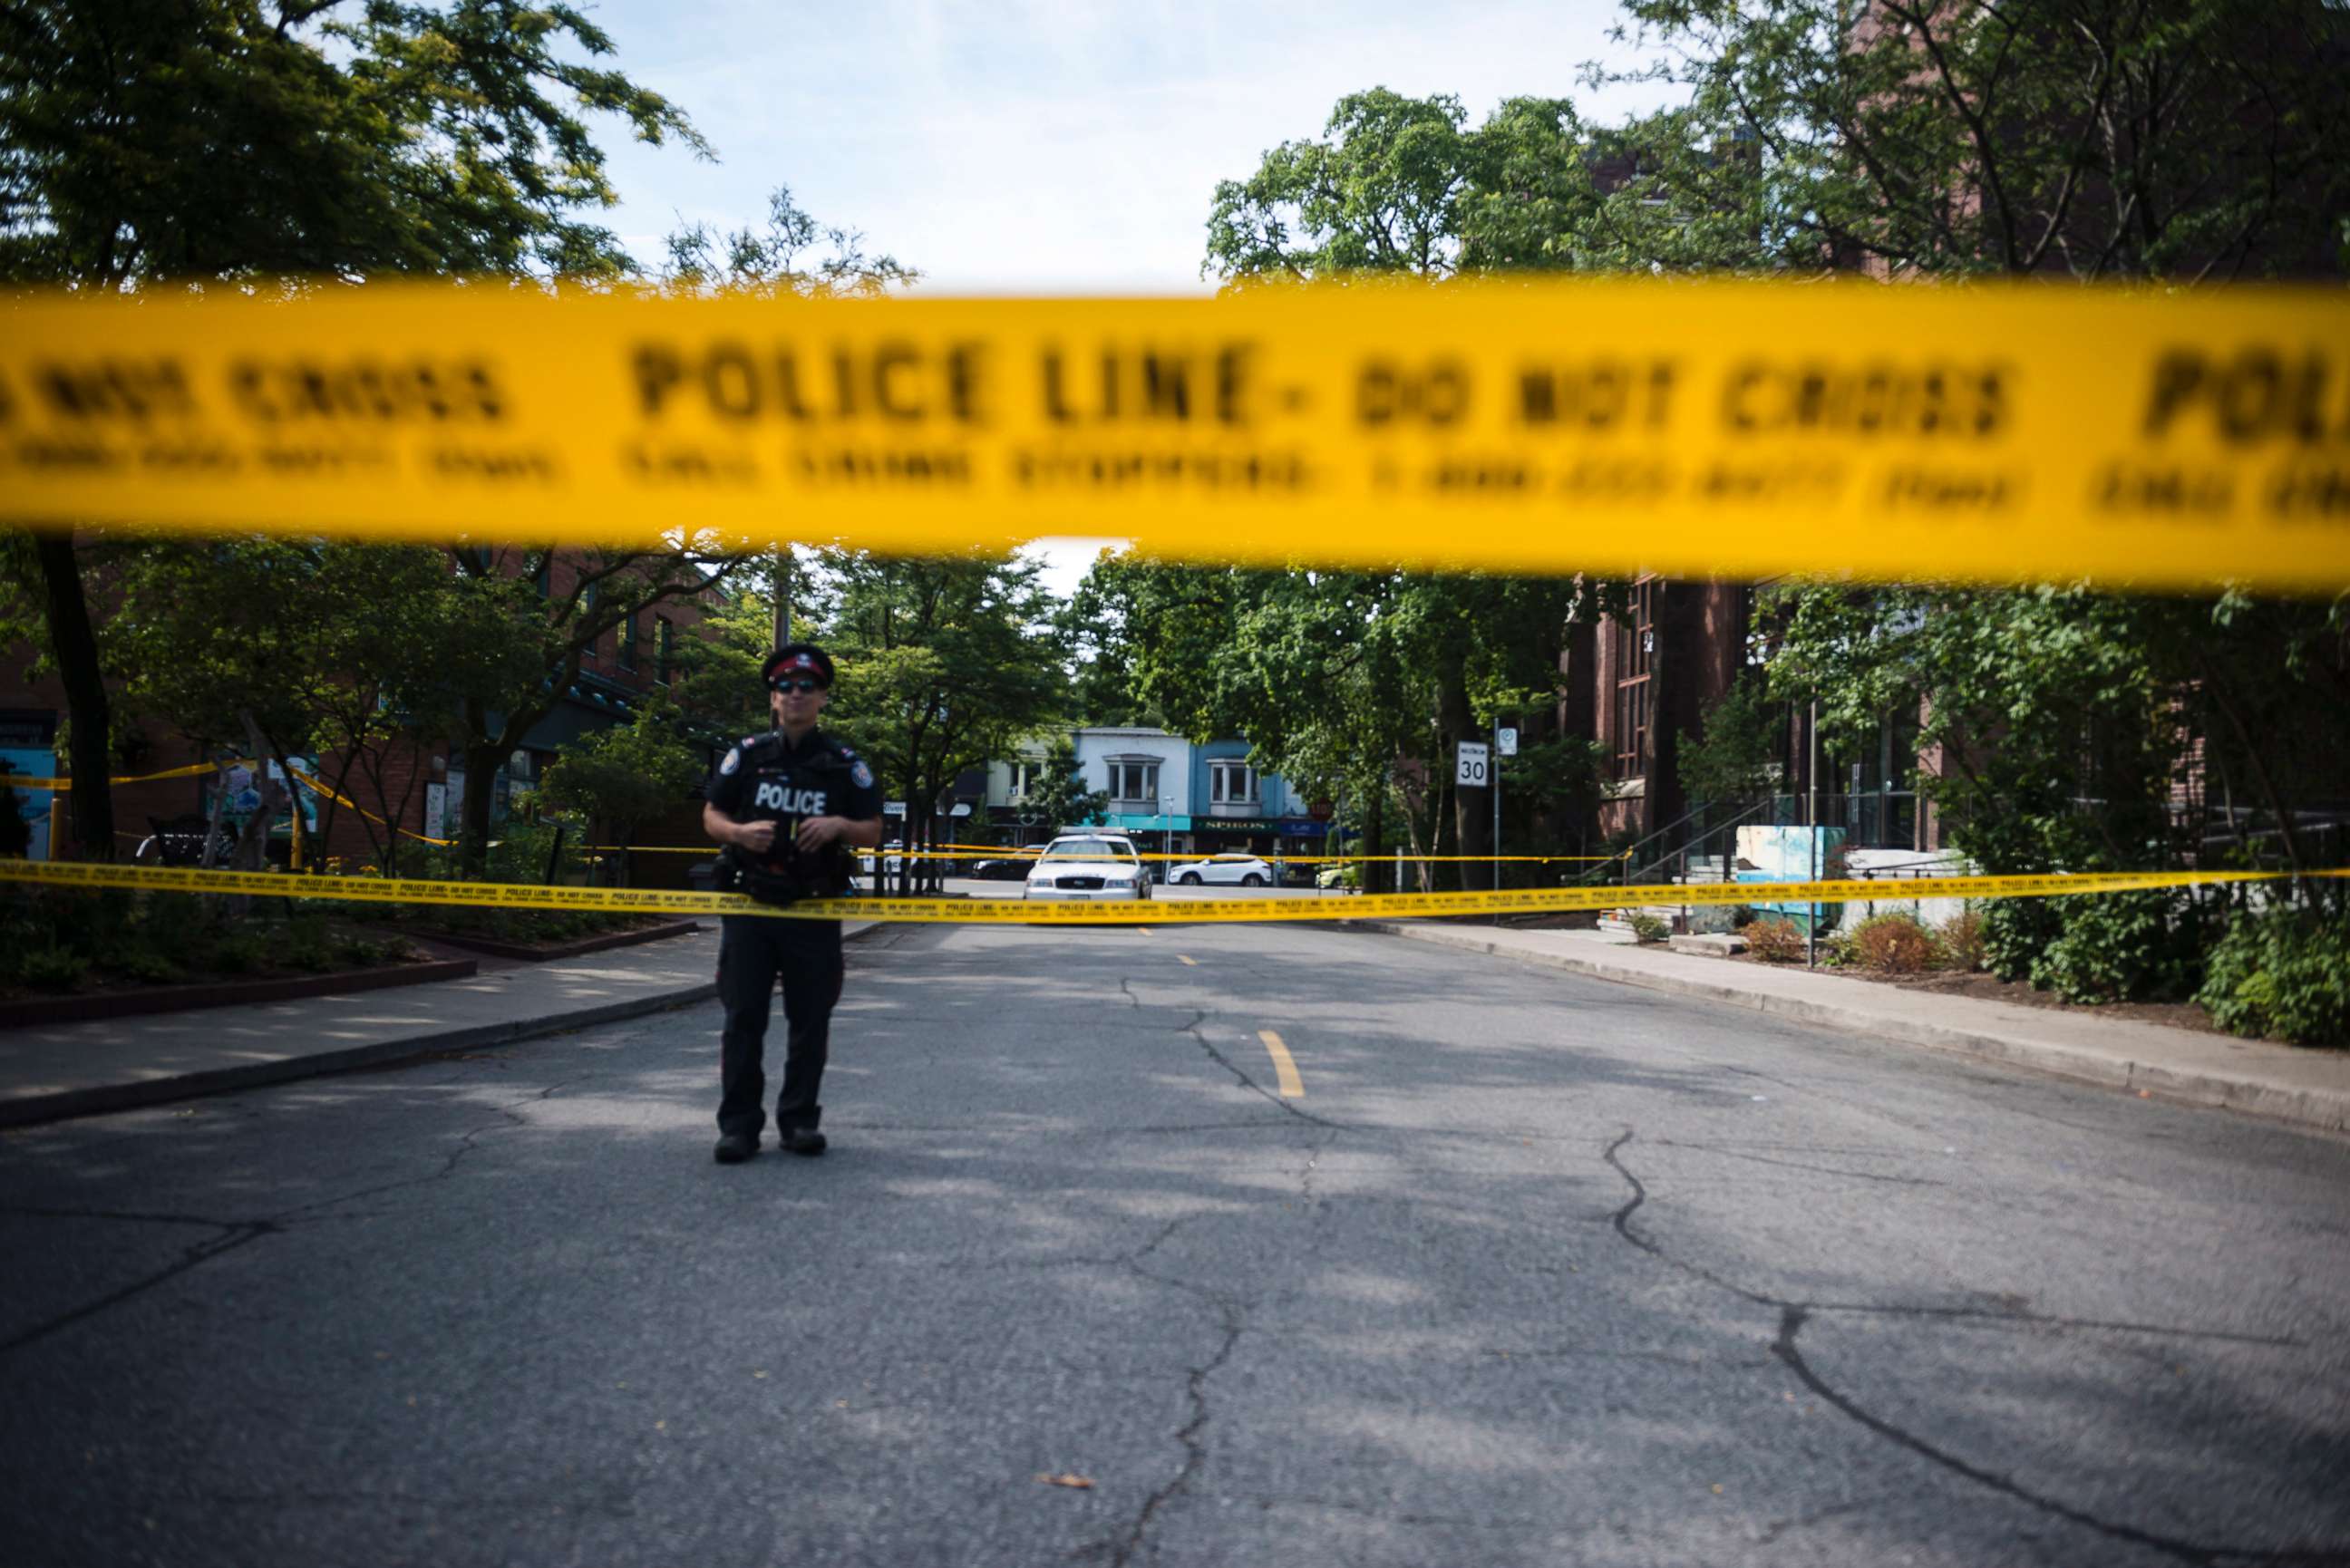 PHOTO: Police are photographed at the perimeter of the scene of a mass shooting in Toronto on July 23, 2018.